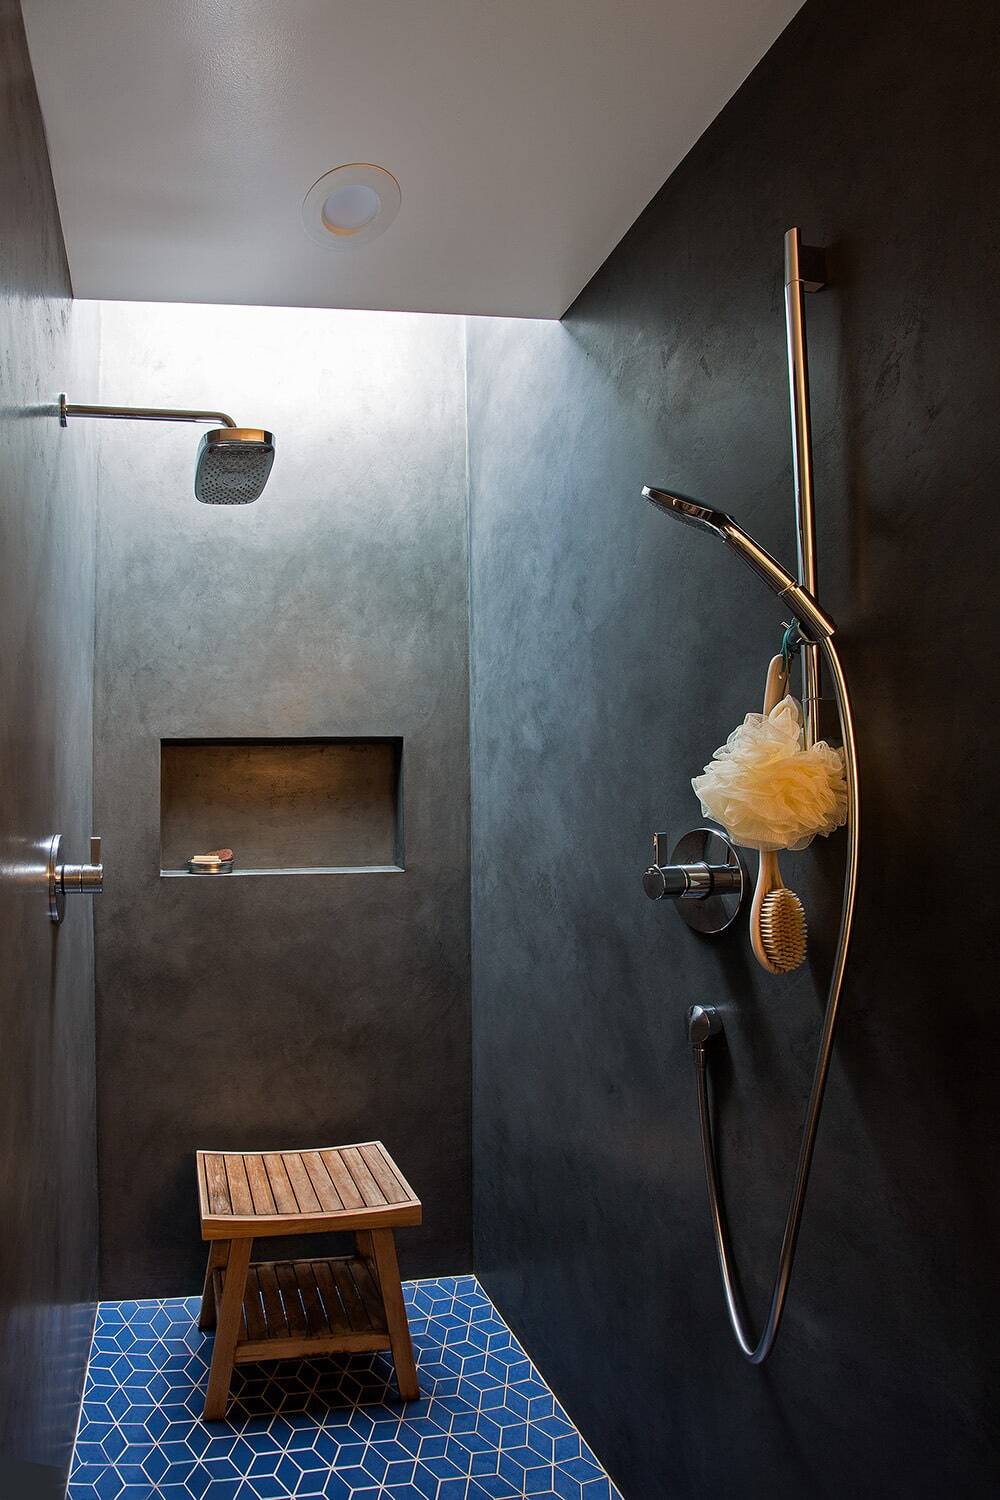 shower, An 800-square-foot home in Seattle's Central Area designed to be part primary dwelling, part urban oasis